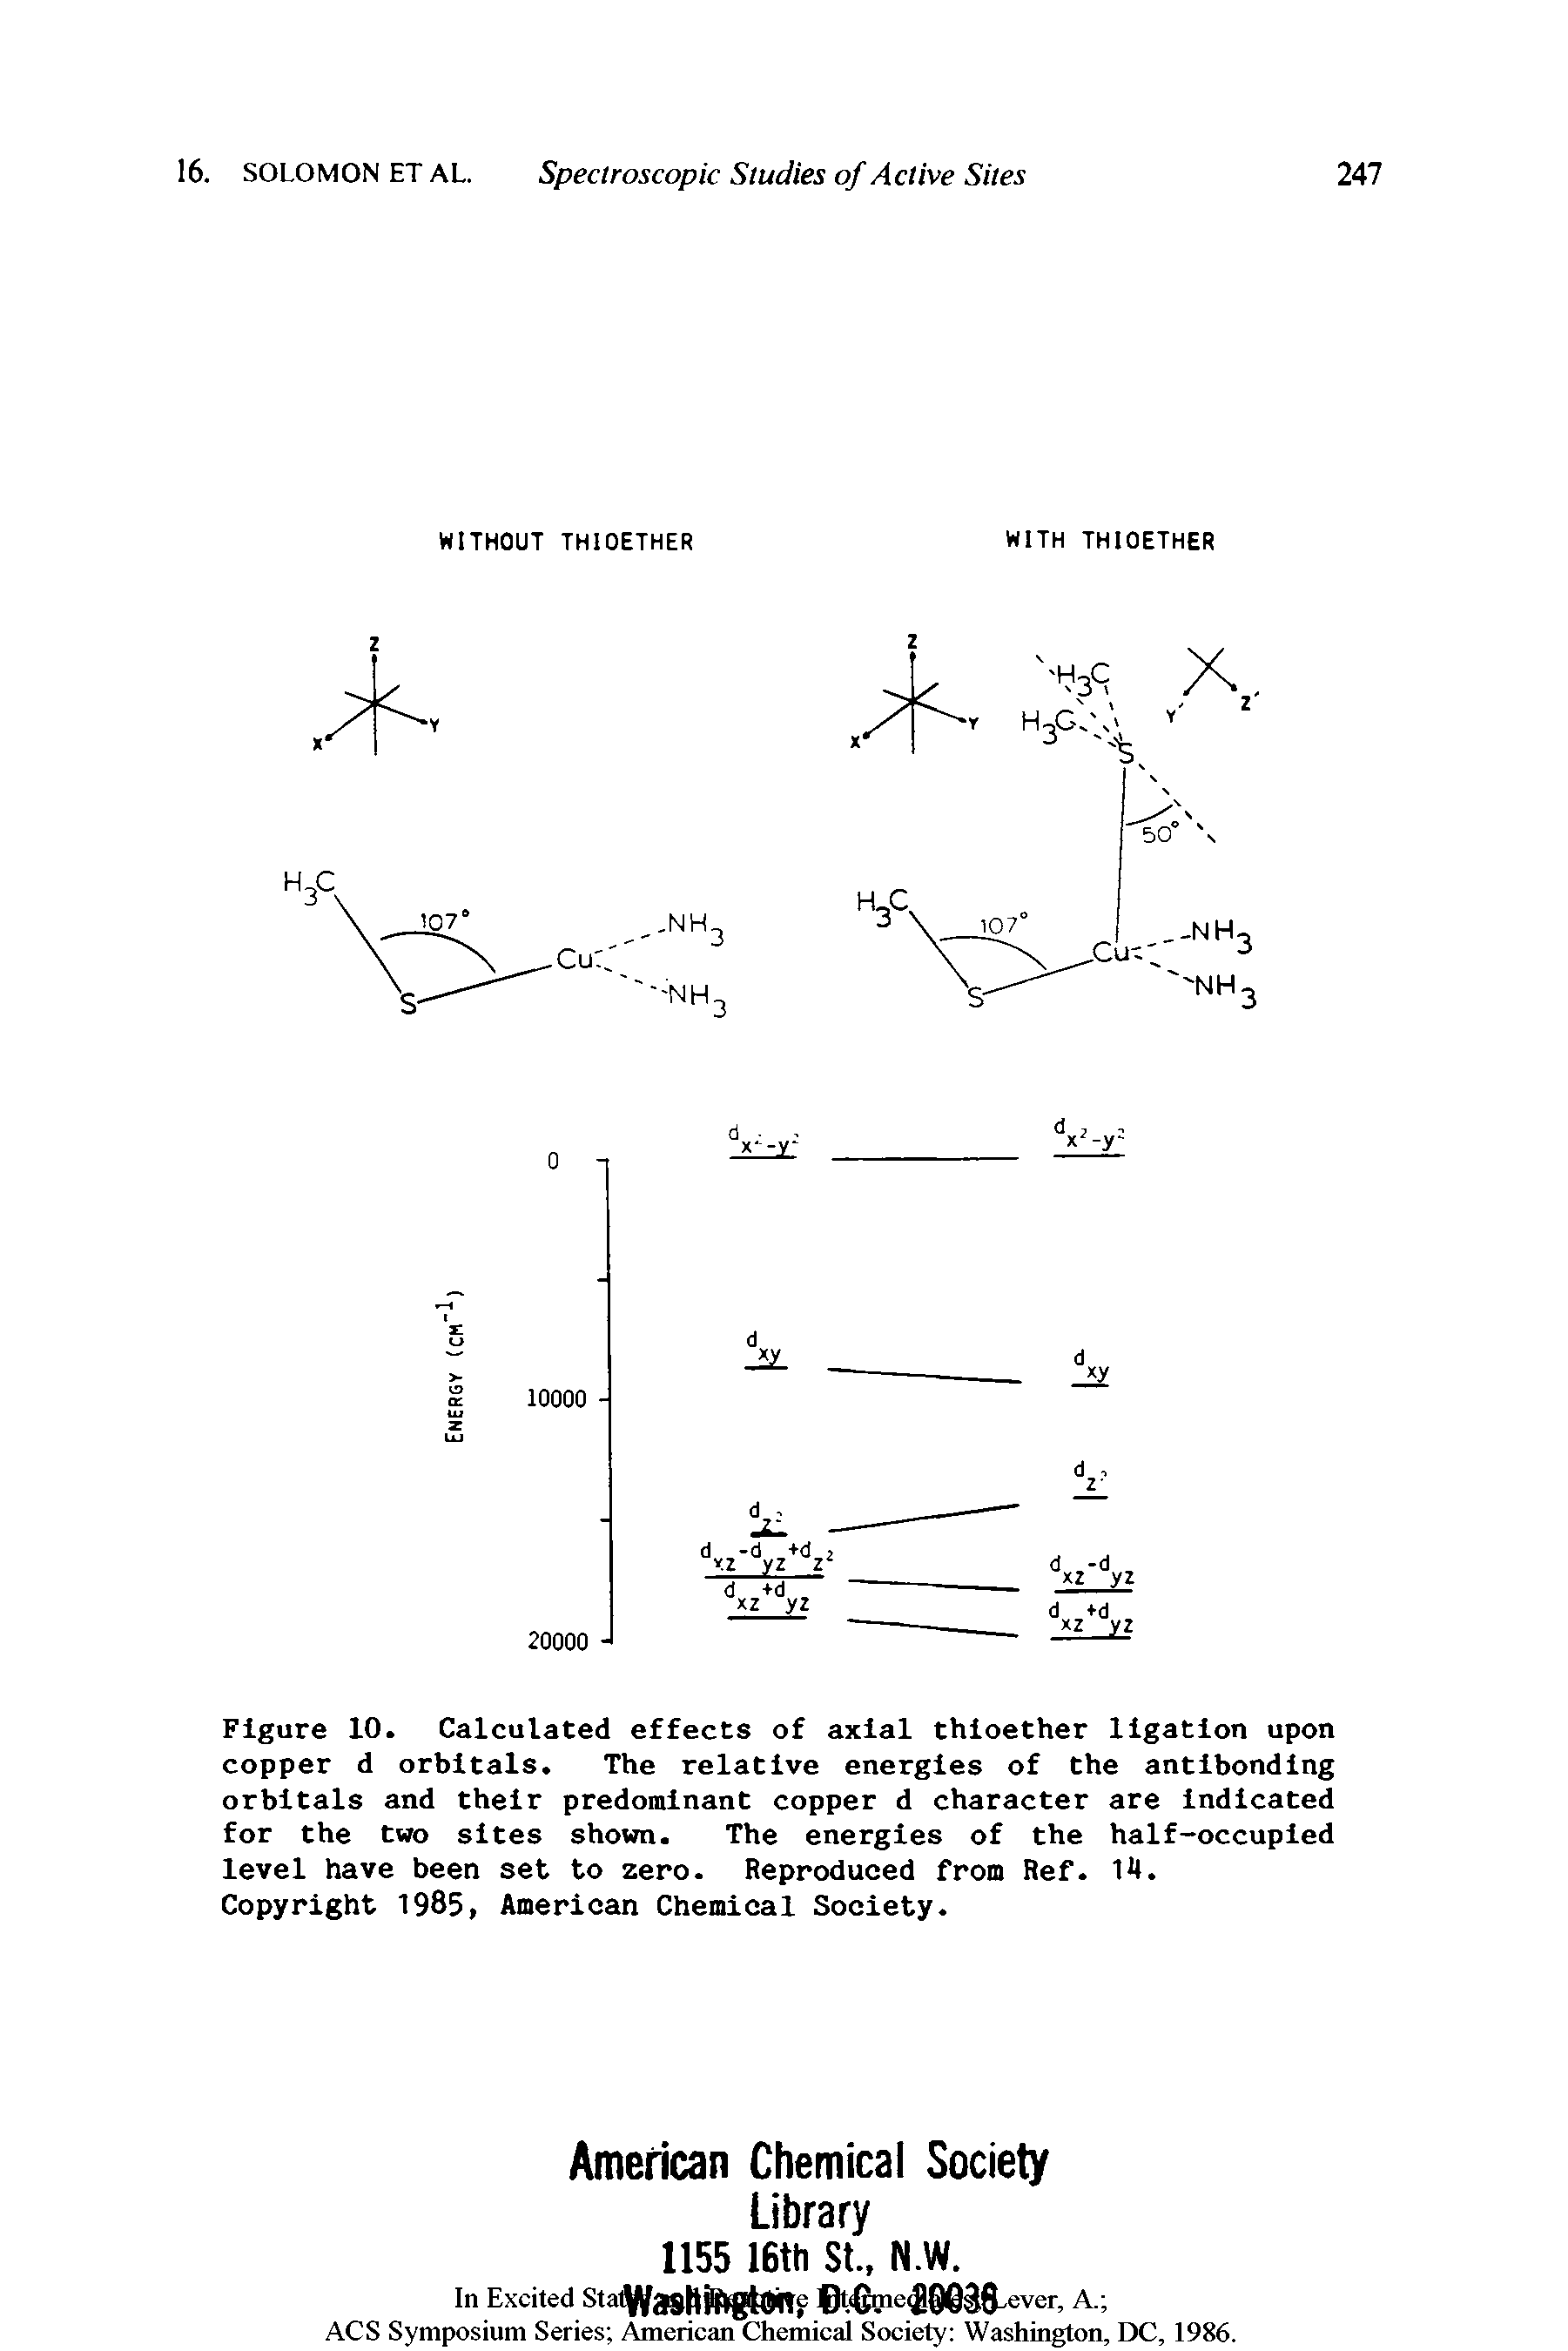 Figure 10. Calculated effects of axial thioether ligation upon copper d orbitals. The relative energies of the antibonding orbitals and their predominant copper d character are indicated for the two sites shown. The energies of the half-occupied level have been set to zero. Reproduced from Ref. 14.